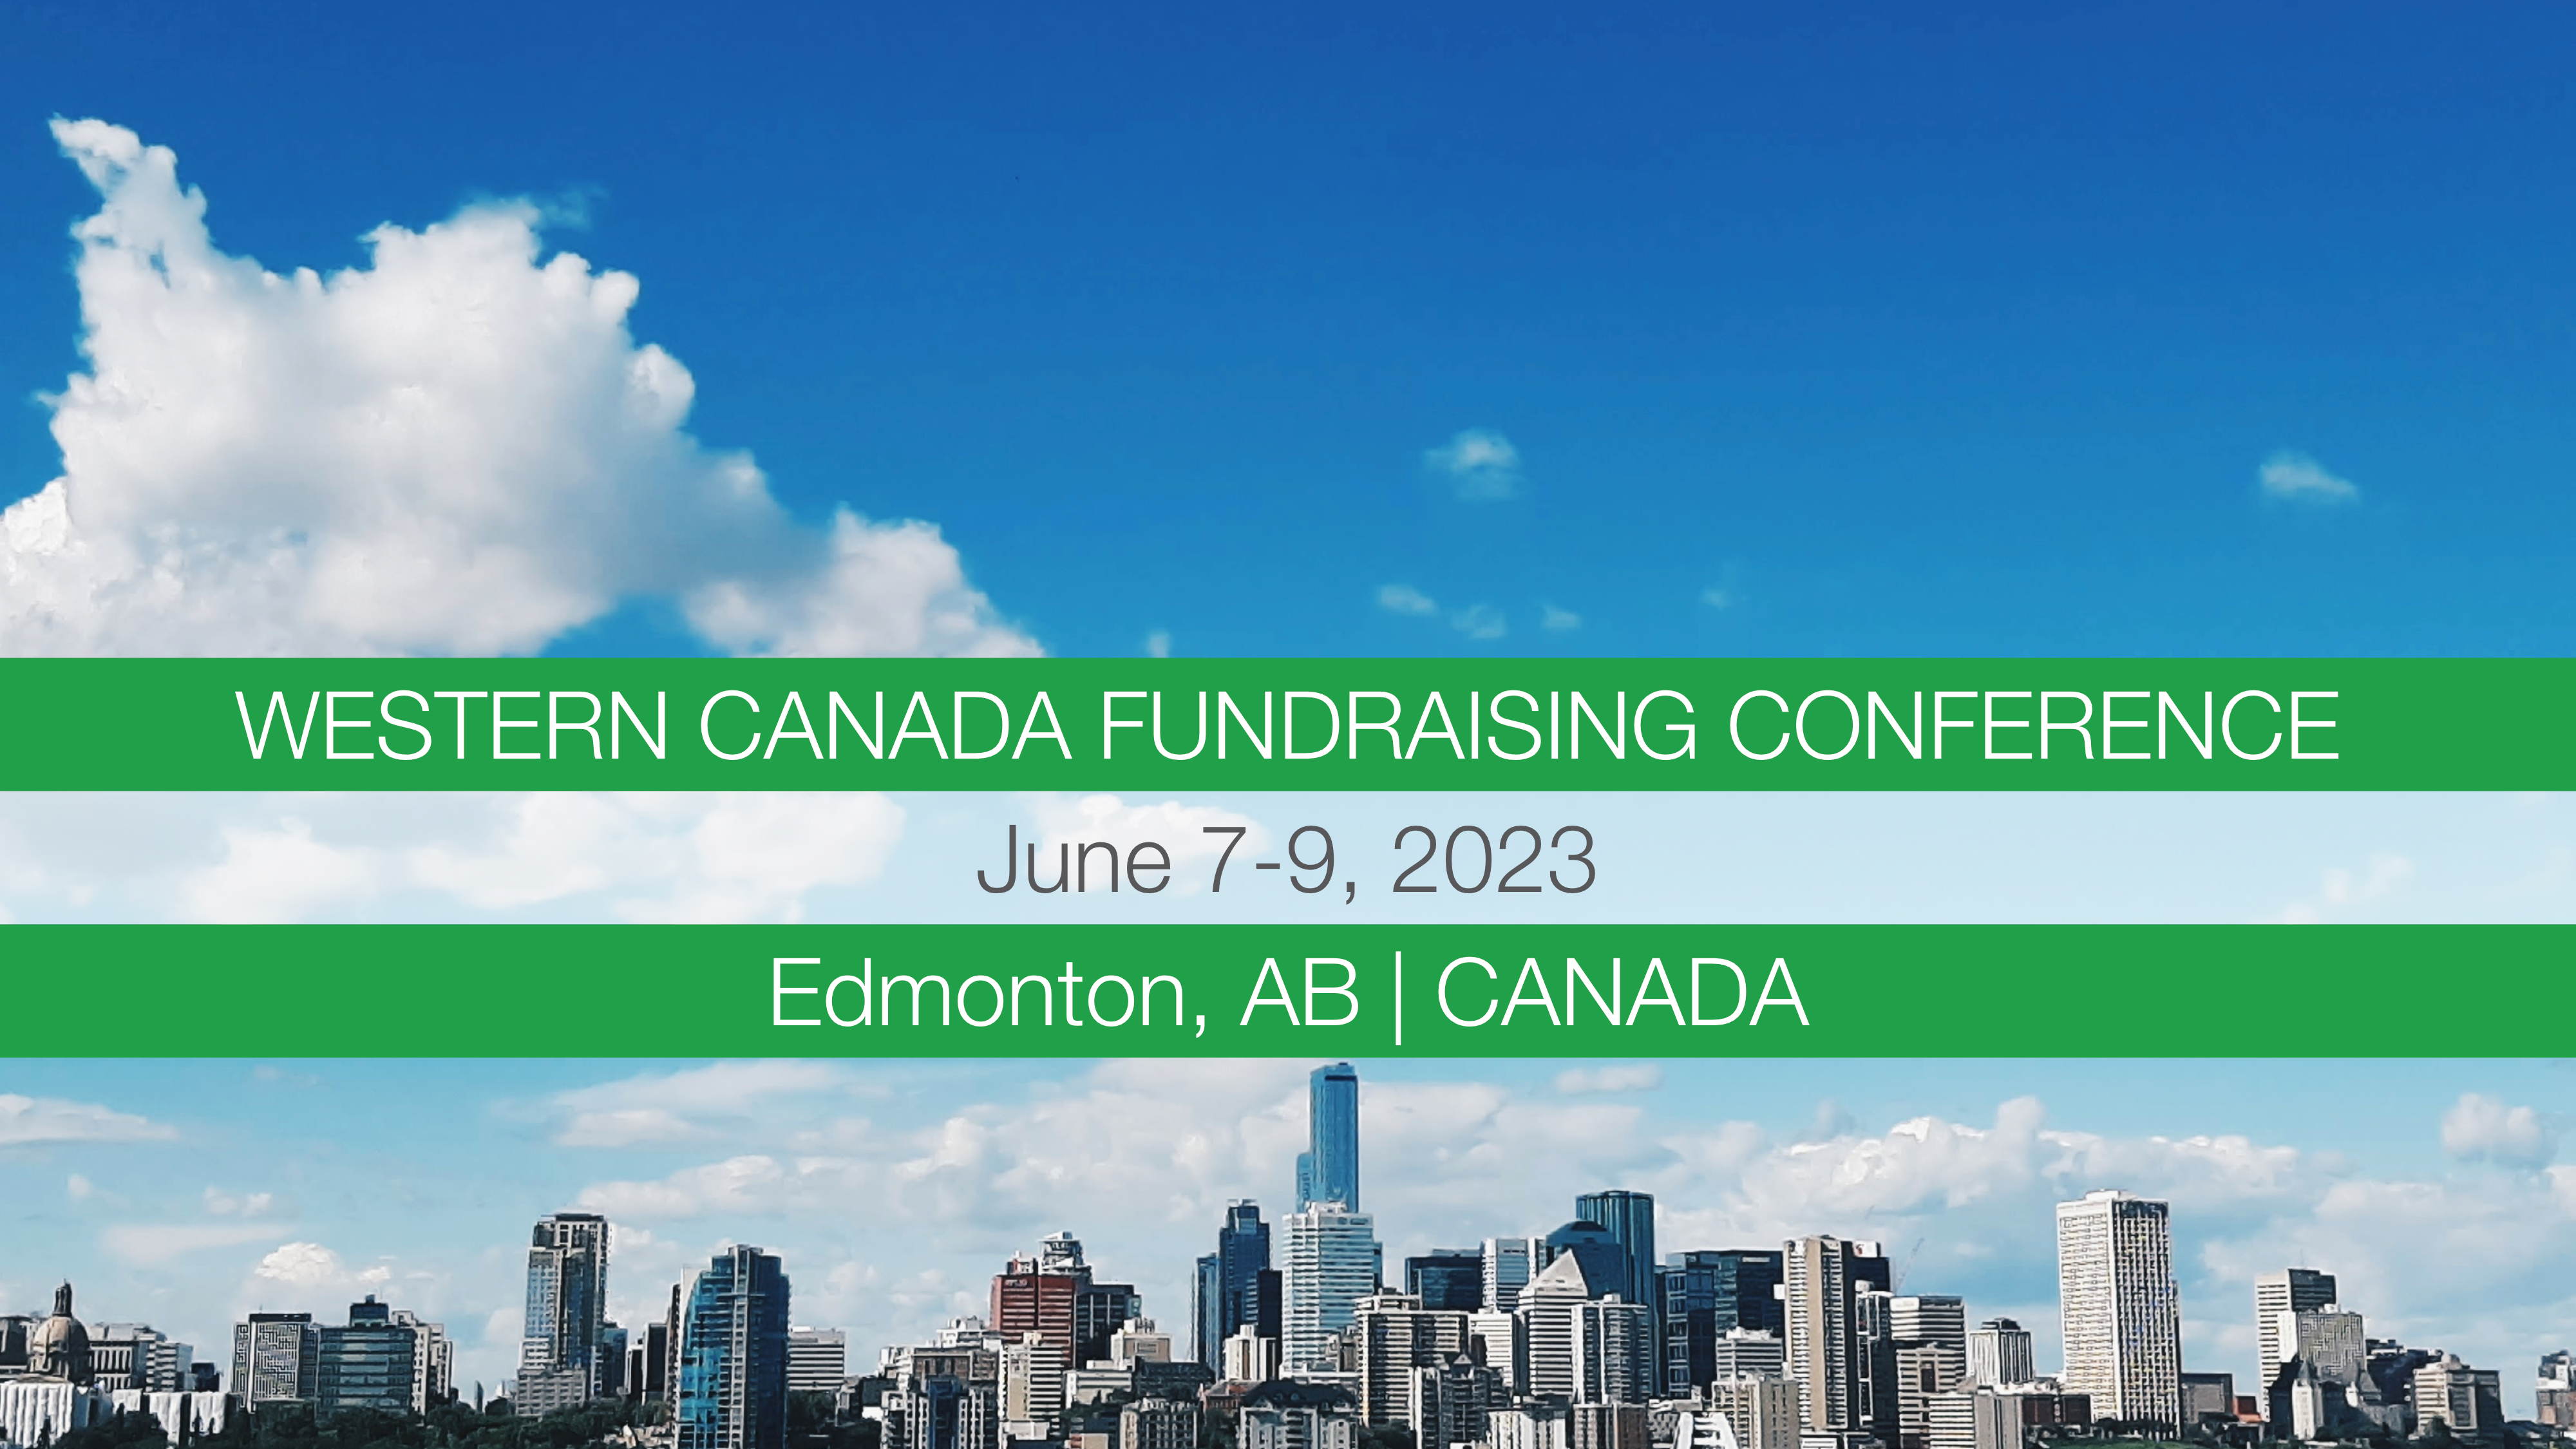 Western Canada Fundraising Conference